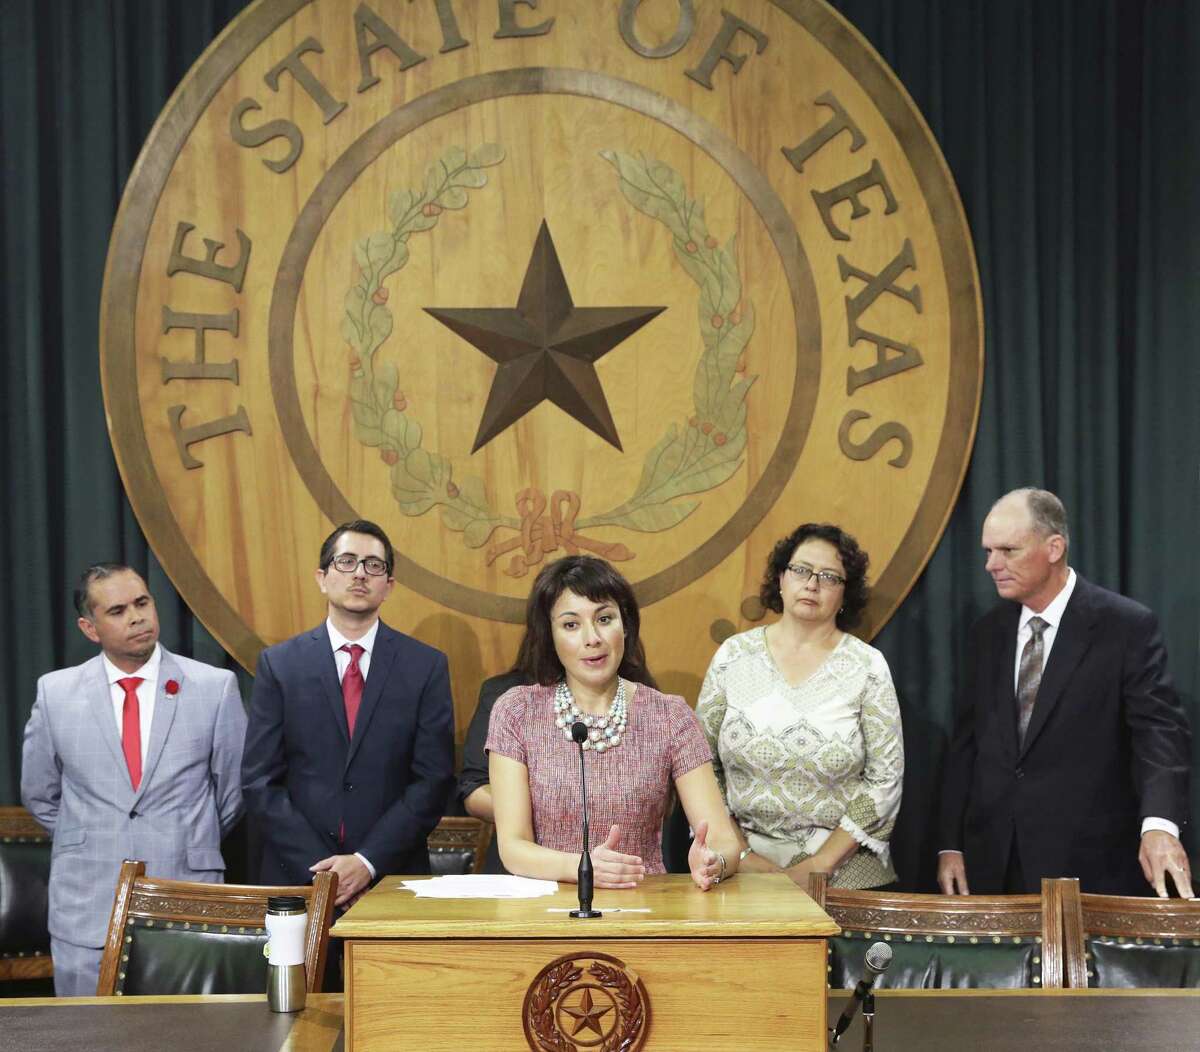 Rep. Gina Hinojosa, D-Austin, makes a point as members of the Mexican American Legislative Caucus speak at the Capitol stating their views of recent governmental action regarding DACA and SB4 in Texas on September 13, 2017.